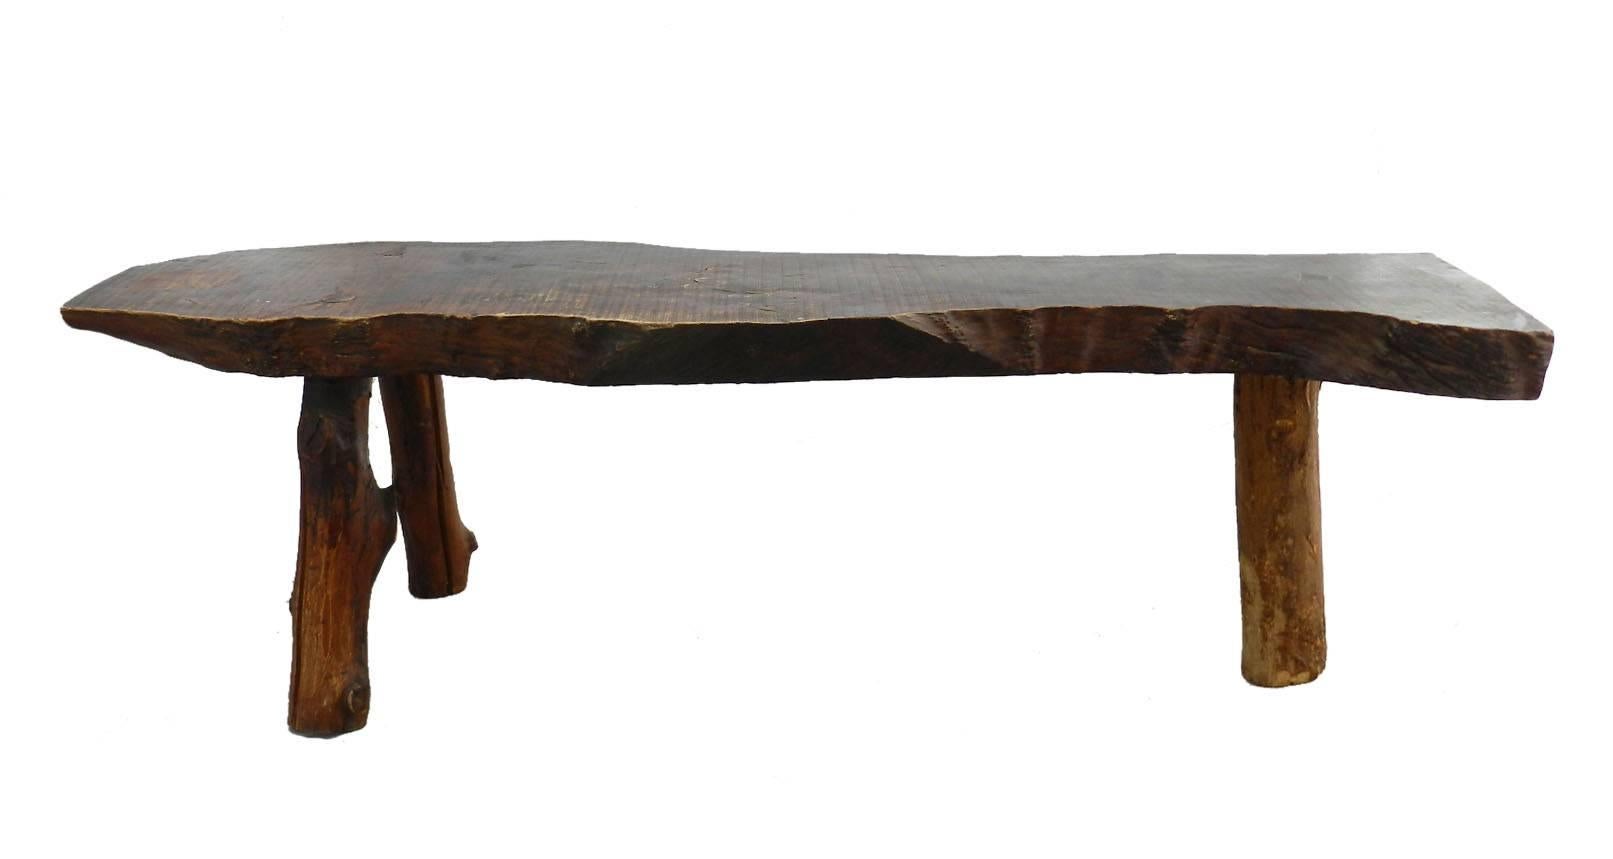 Coffee table bench
Vintage rough hewn edge rustic
Live edge
Free-form slab Nakashima style
Handmade French Folk Art shed art
Good vintage condition heavy, sound and solid
The underside has drilled holes and the wood has been treated as a